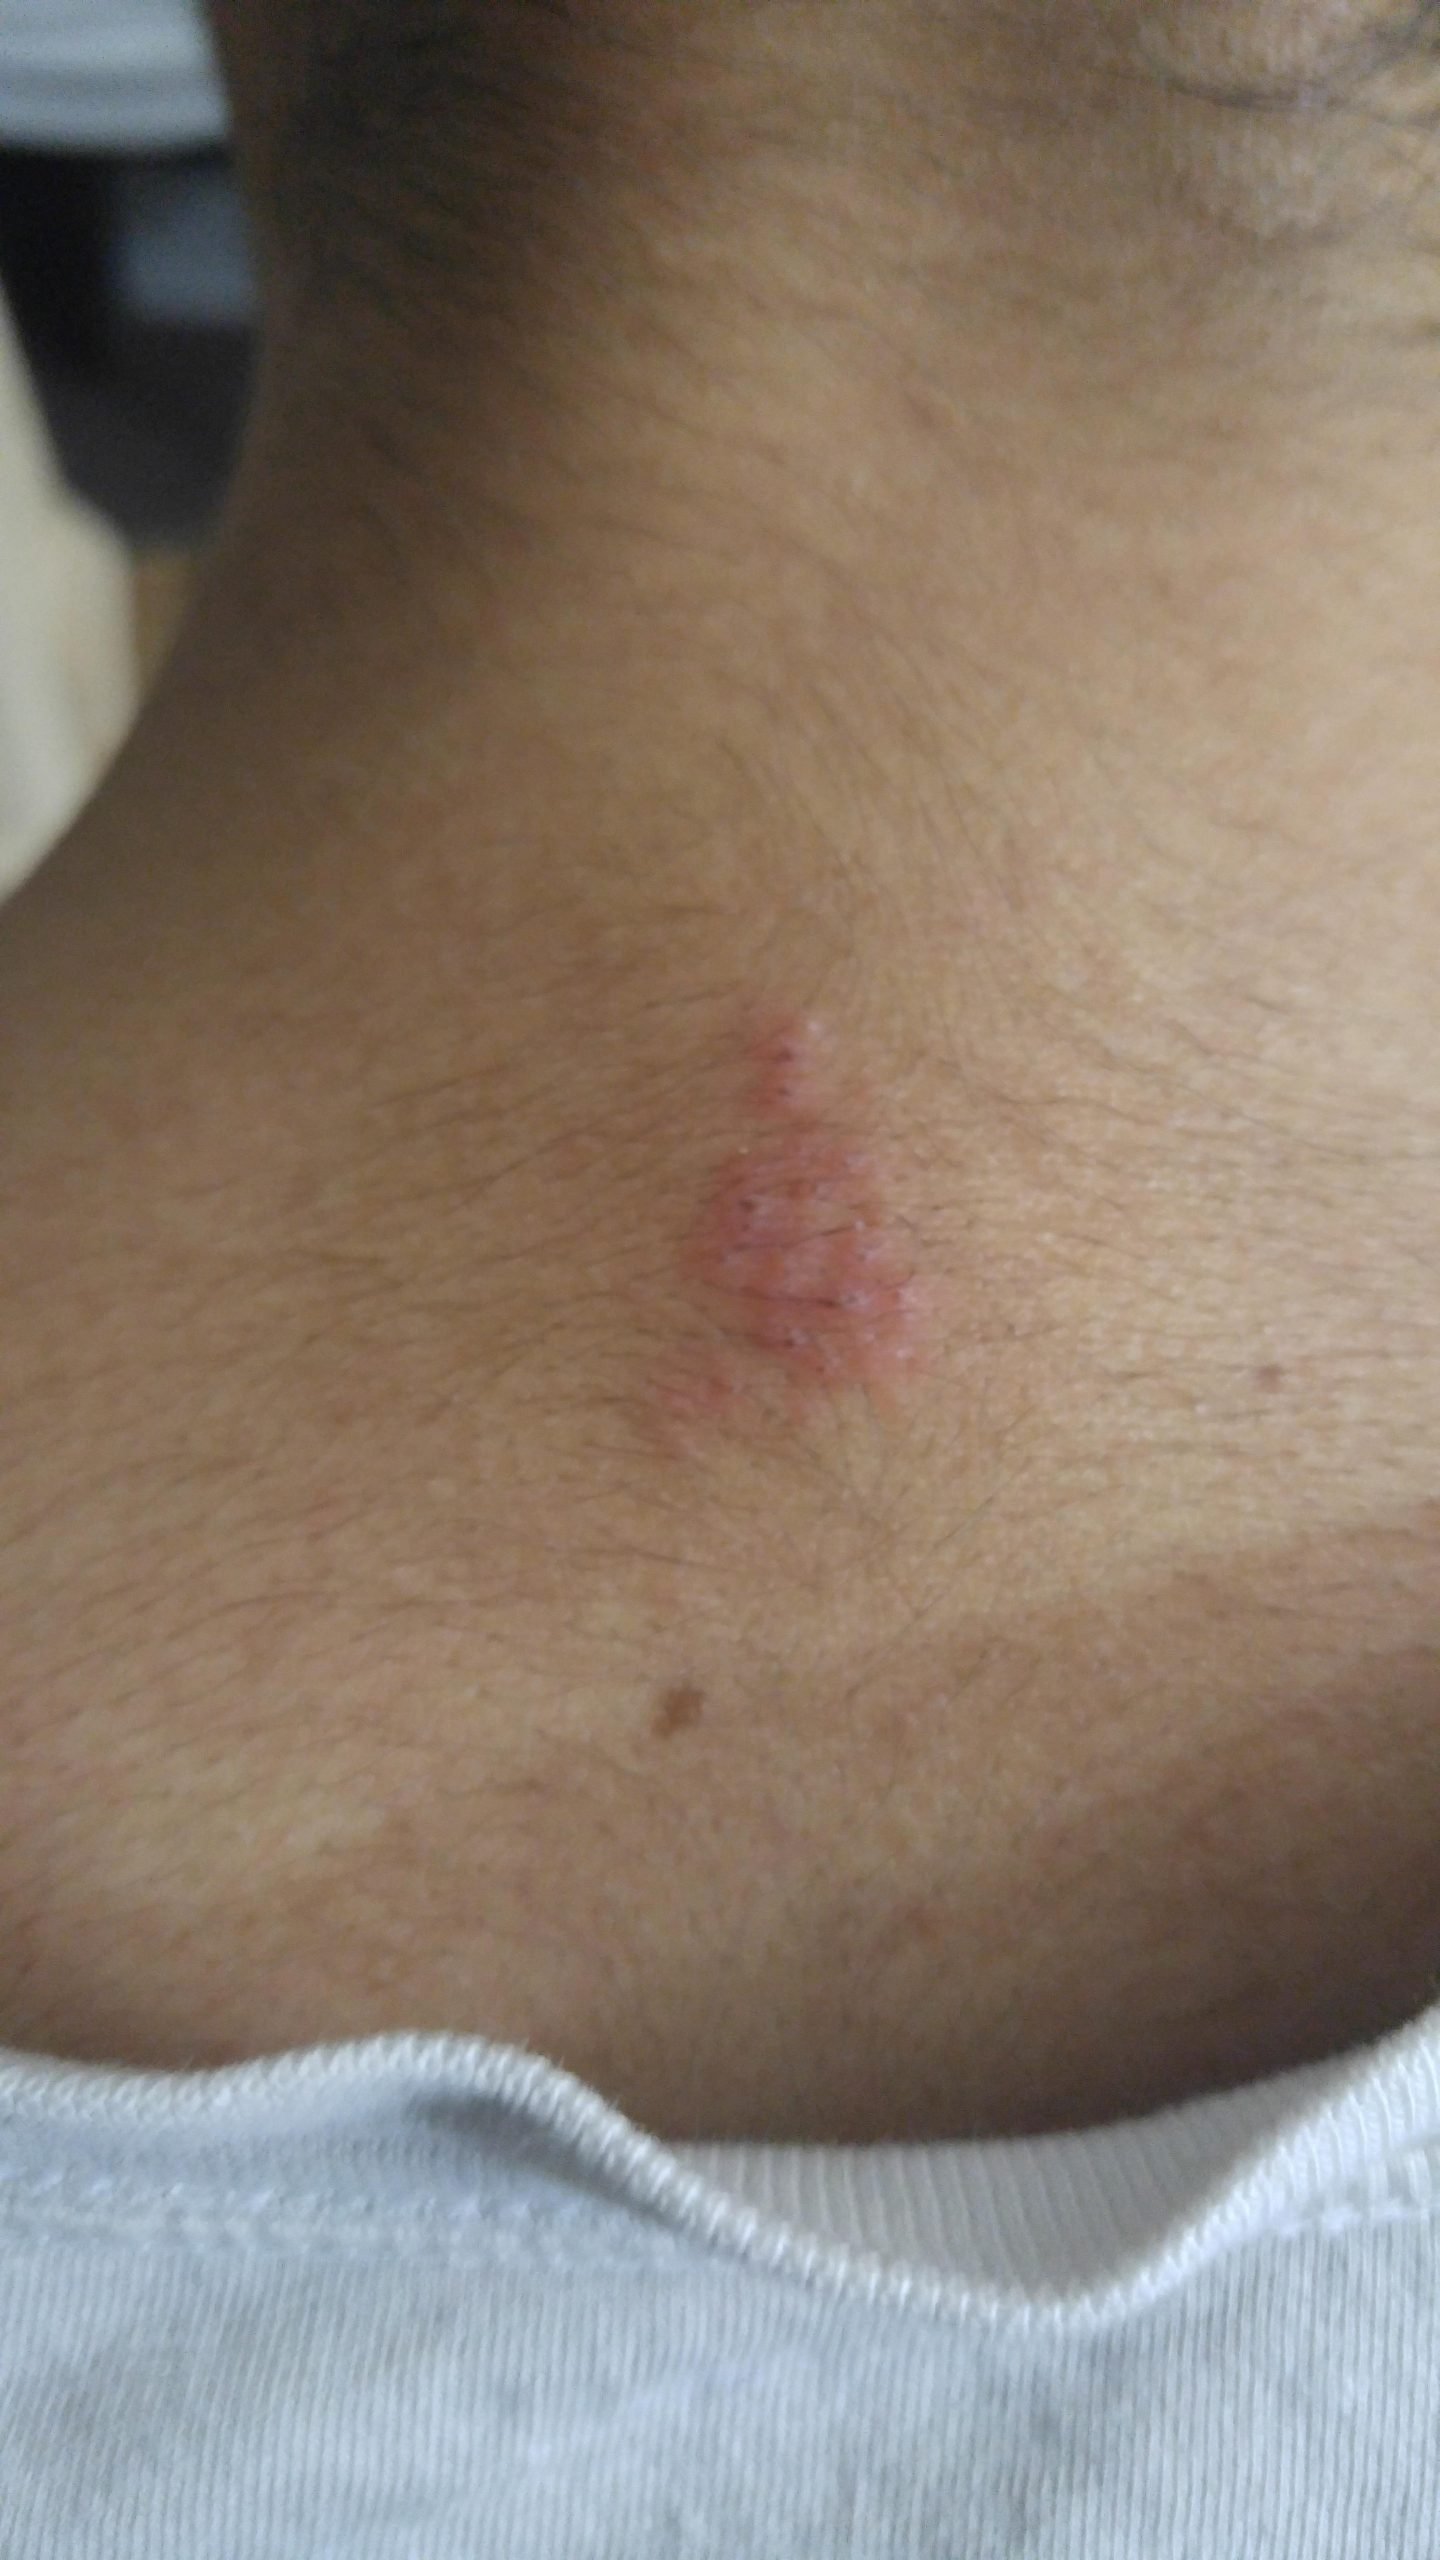 I noticed this a couple of days ago on my upper neck/back area. I have ...